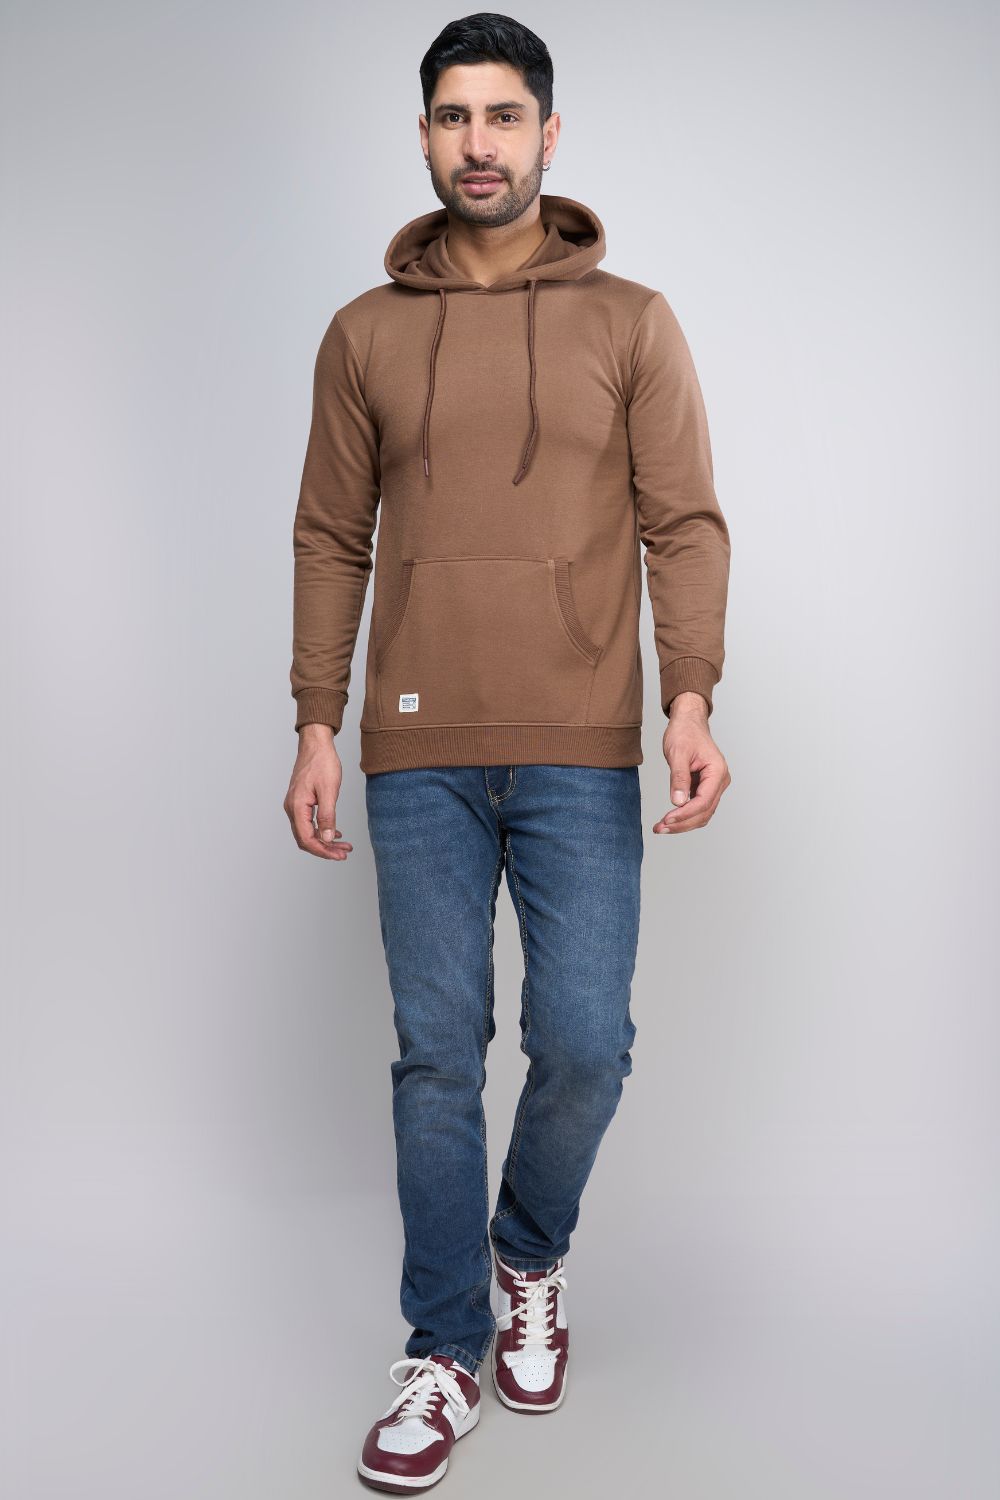 Dark Tan colored, hoodie for men with full sleeves and relaxed fit, Full view.